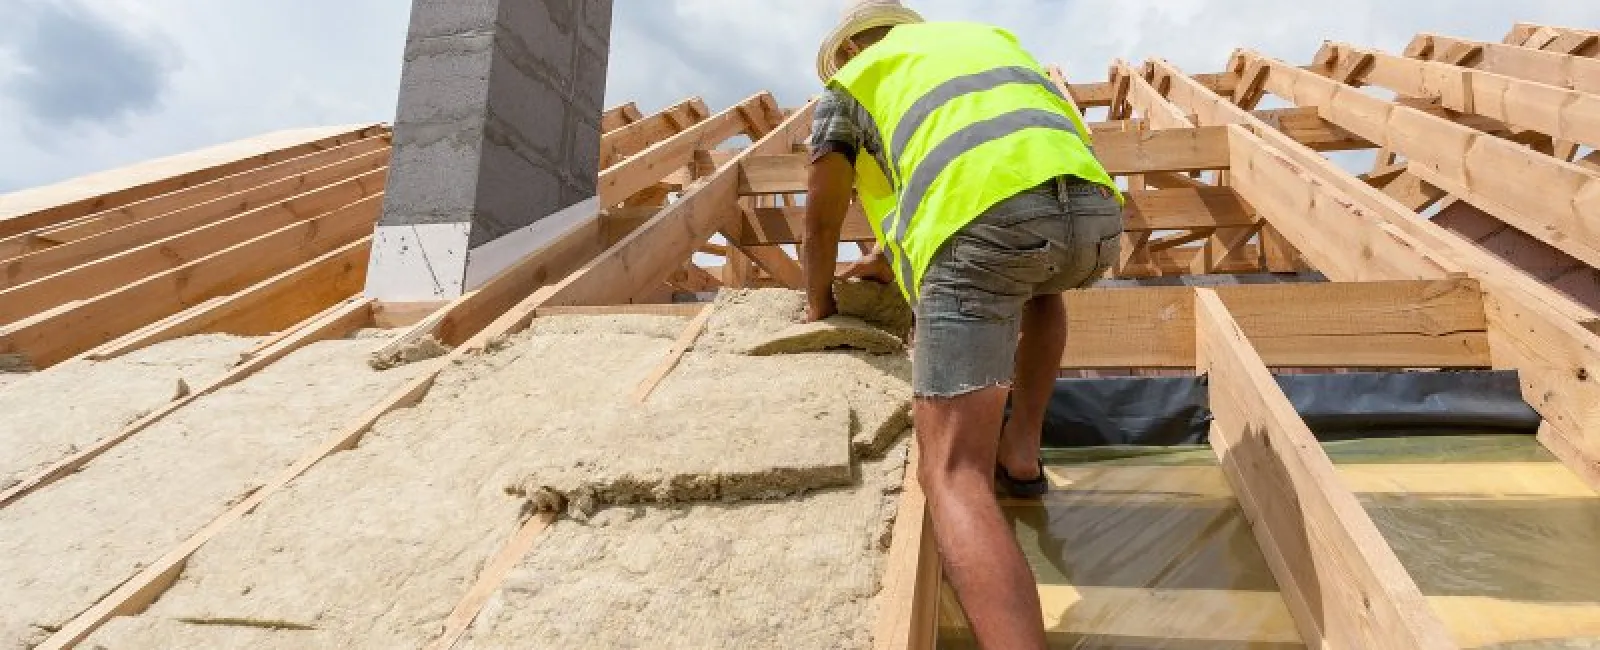 Why A Roof Project Is the Best Time for New Attic Insulation